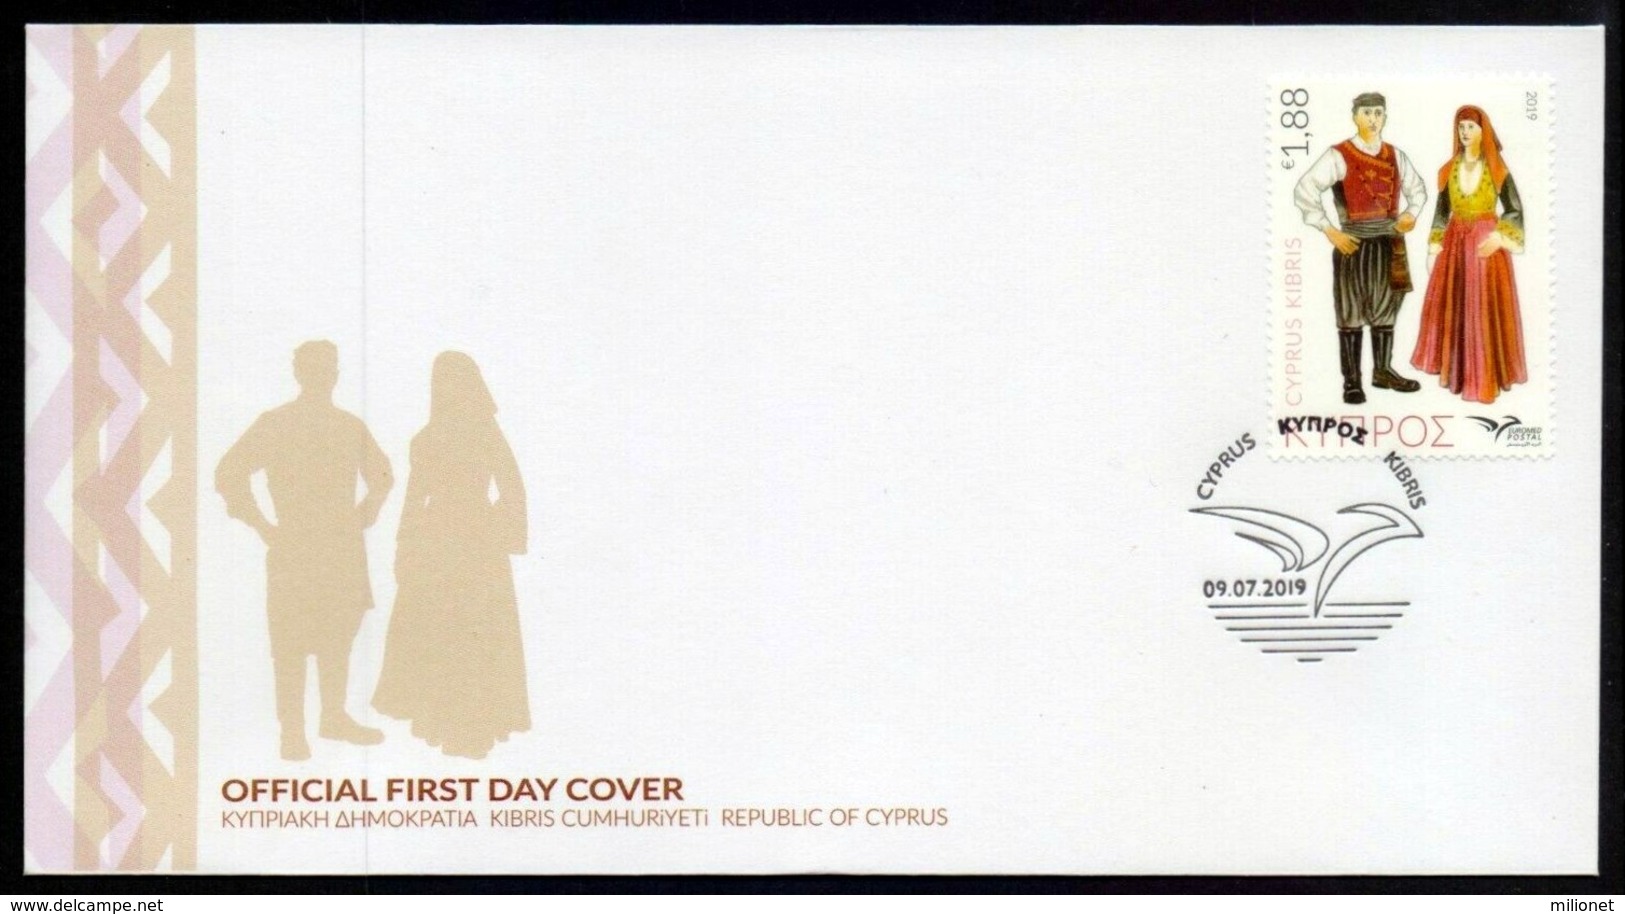 CYPRUS CHIPRE CHYPRE ZUPERN 2019 EUROMED POSTAL Costumes Of Mediterranean FDC First Day Cover Europa Sympathy Mitläufer - Ideas Europeas